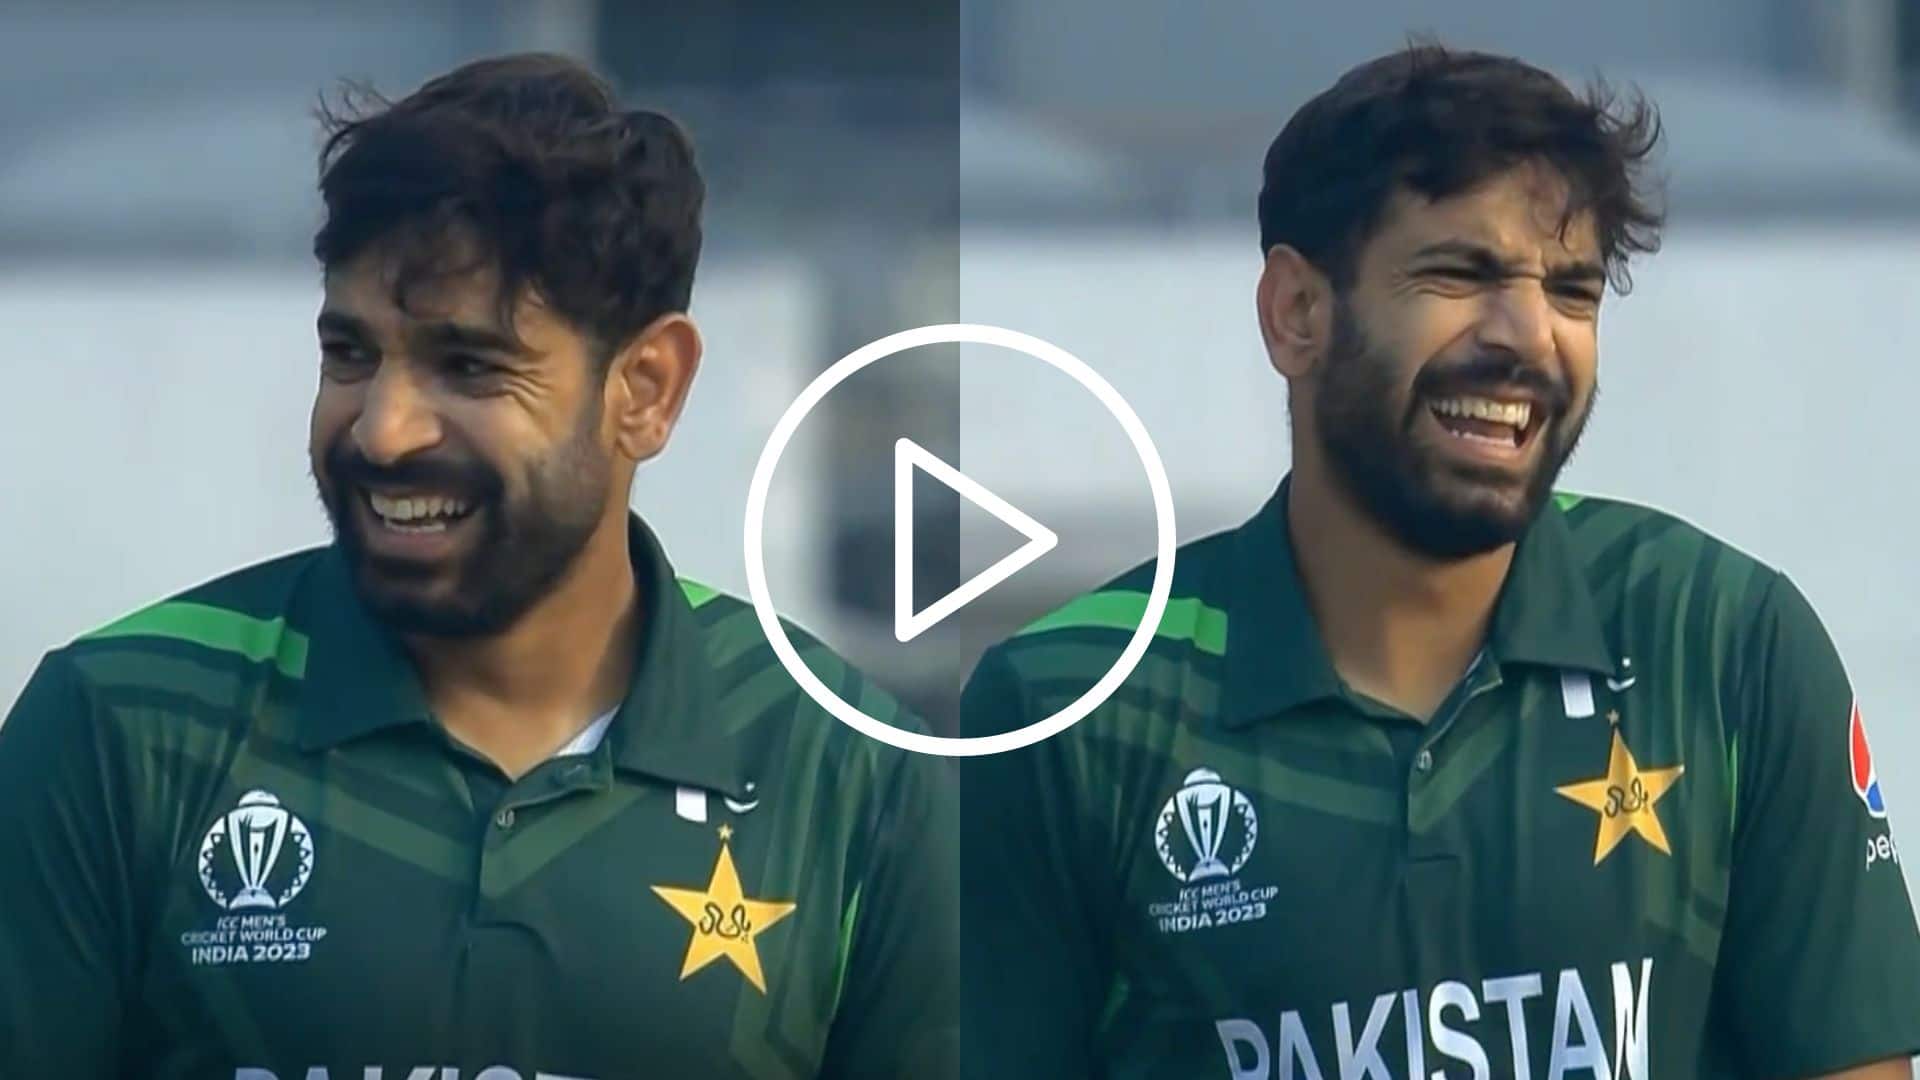 [Watch] Haris Rauf Laughs His Heart Out As Jonny Bairstow Falls To A Nothing Delivery